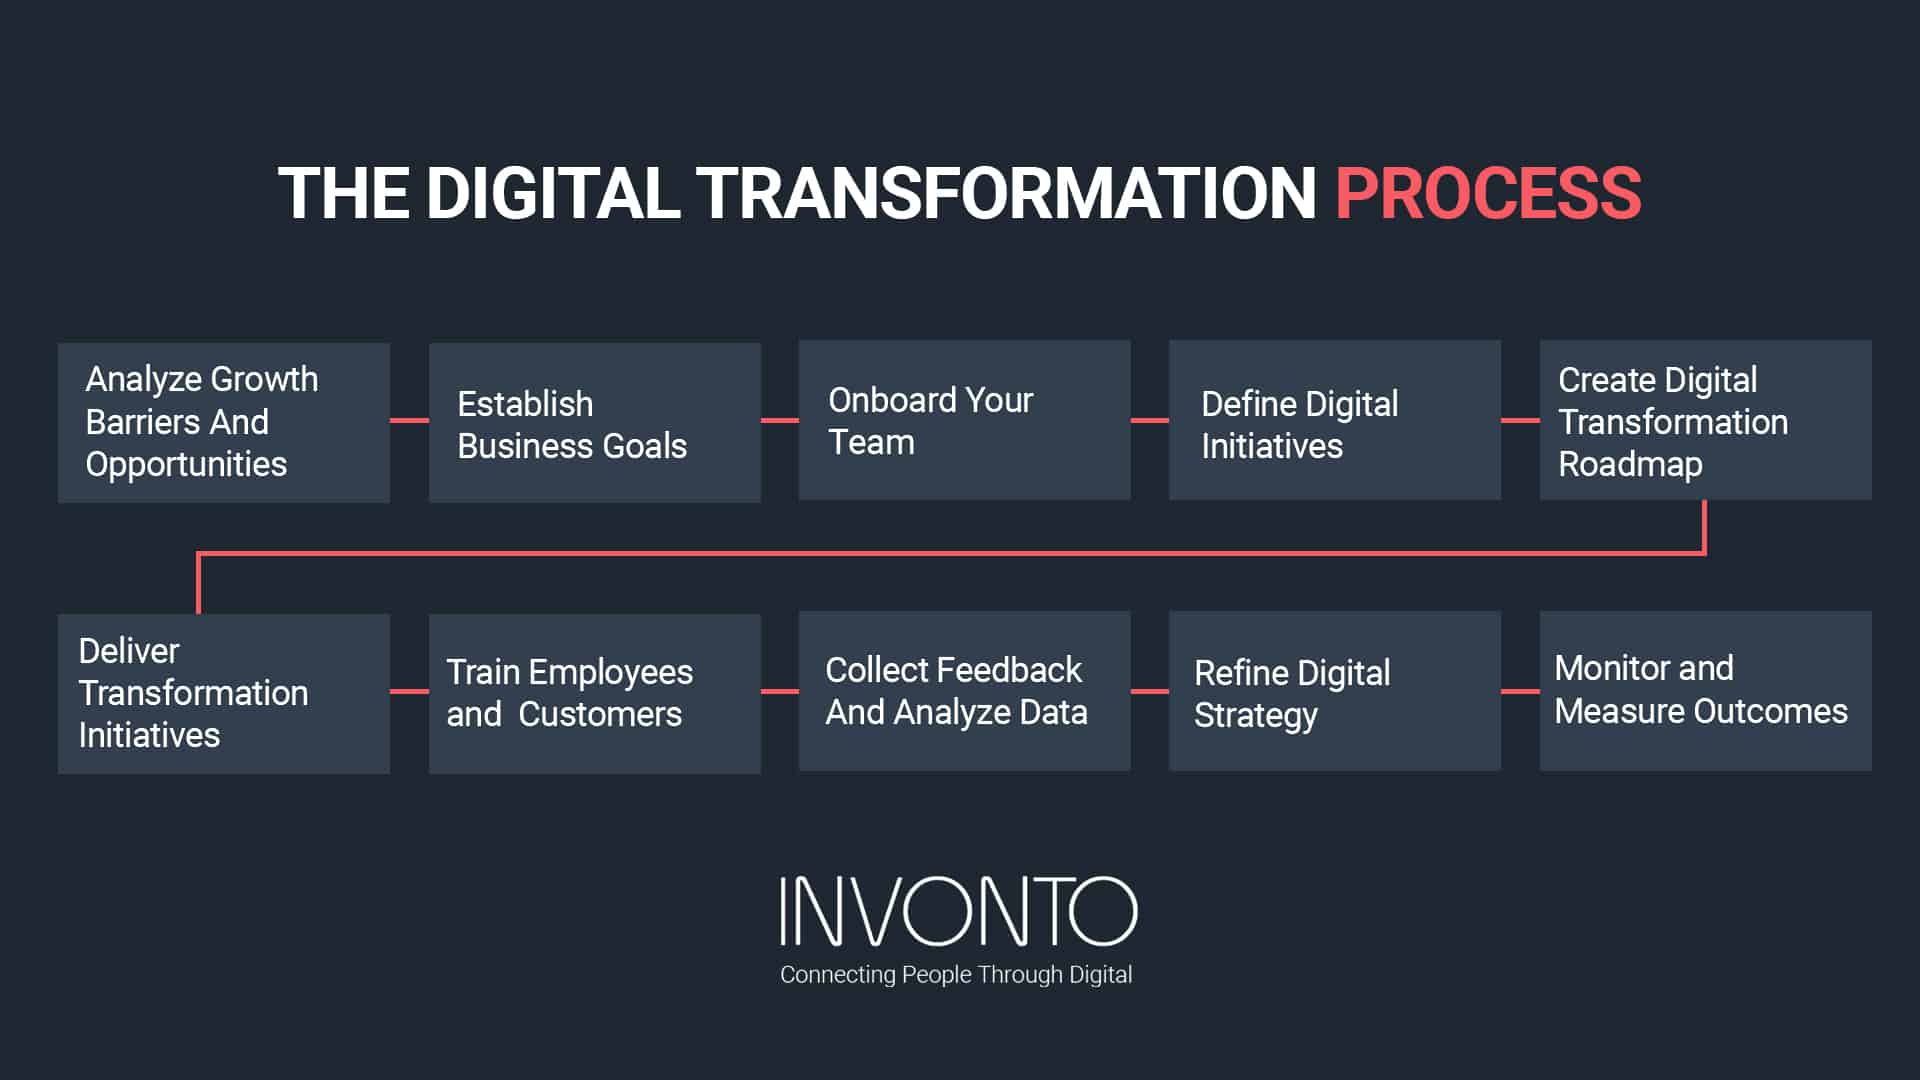 The digital transformation consulting process by Invonto